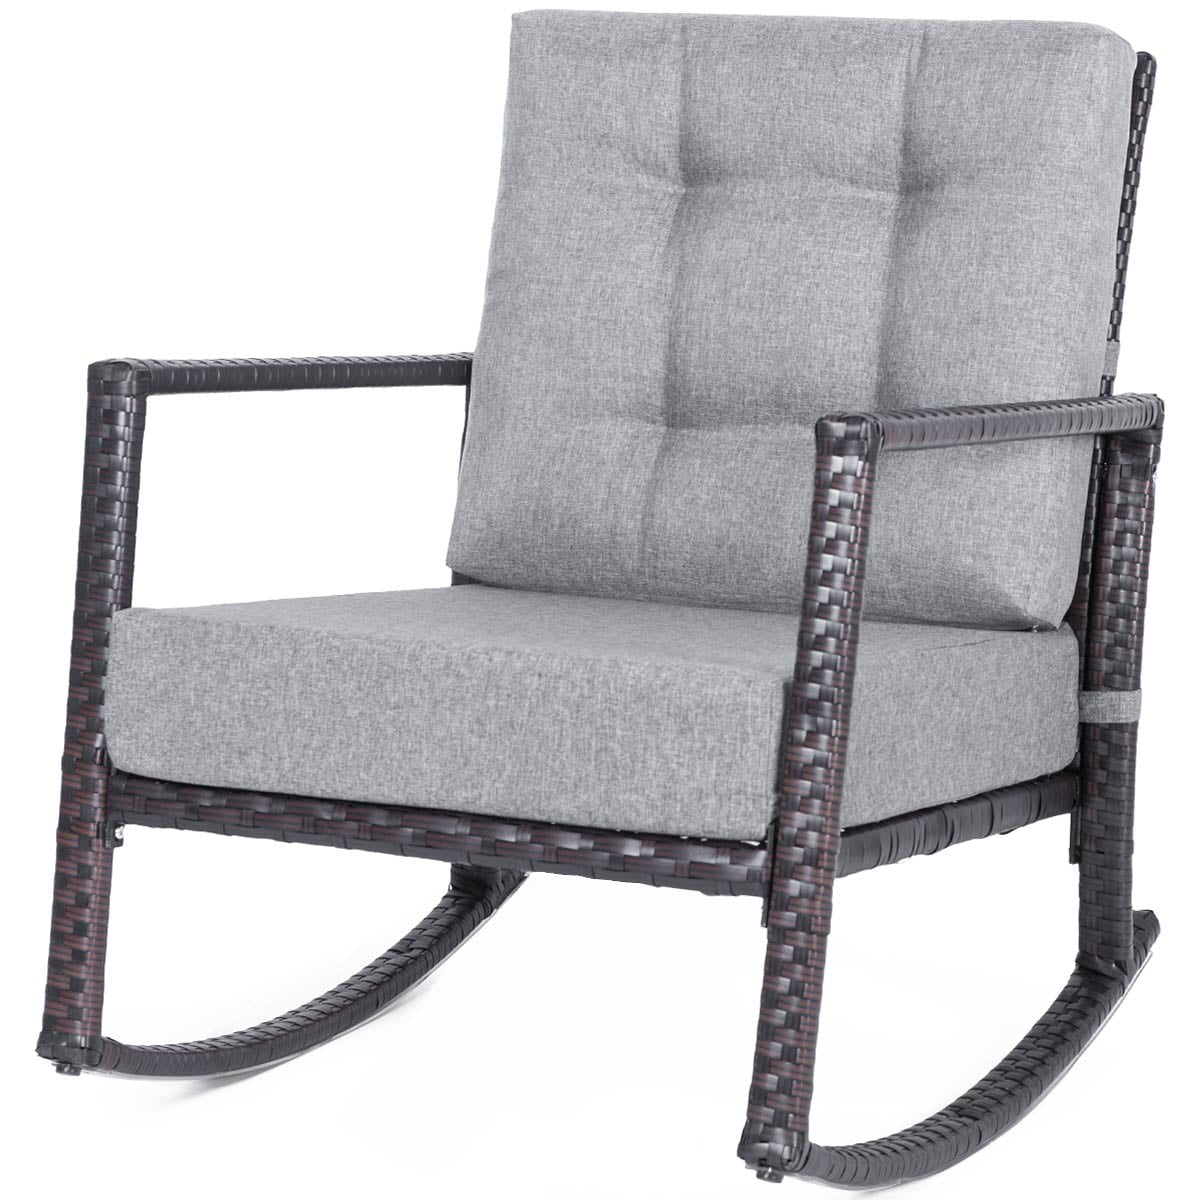 Outdoor Patio Furniture Clearance, SEGMART Patio Rattan Wicker Rocking Chair with Thick ...